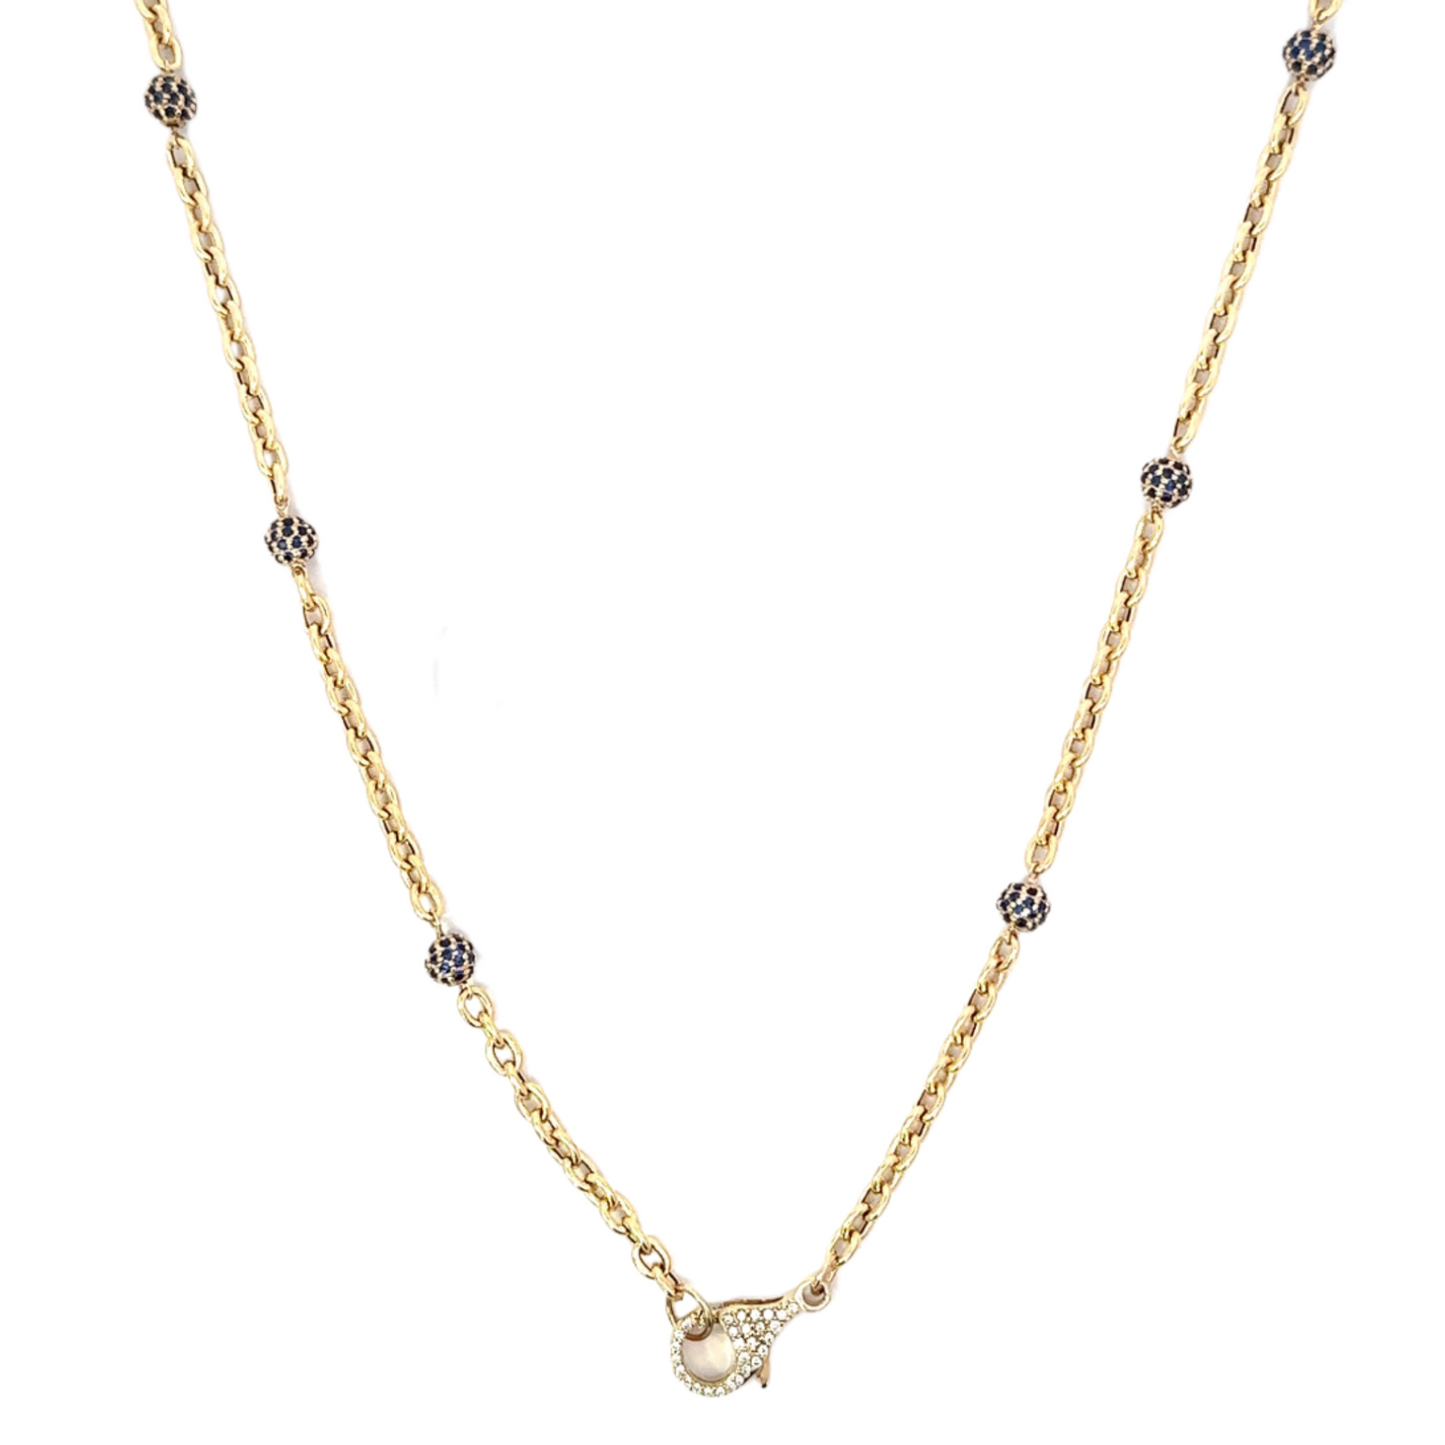 Yellow Gold Oval Link Necklace with Sapphire Bead Accents and Tiny Pave Lobster